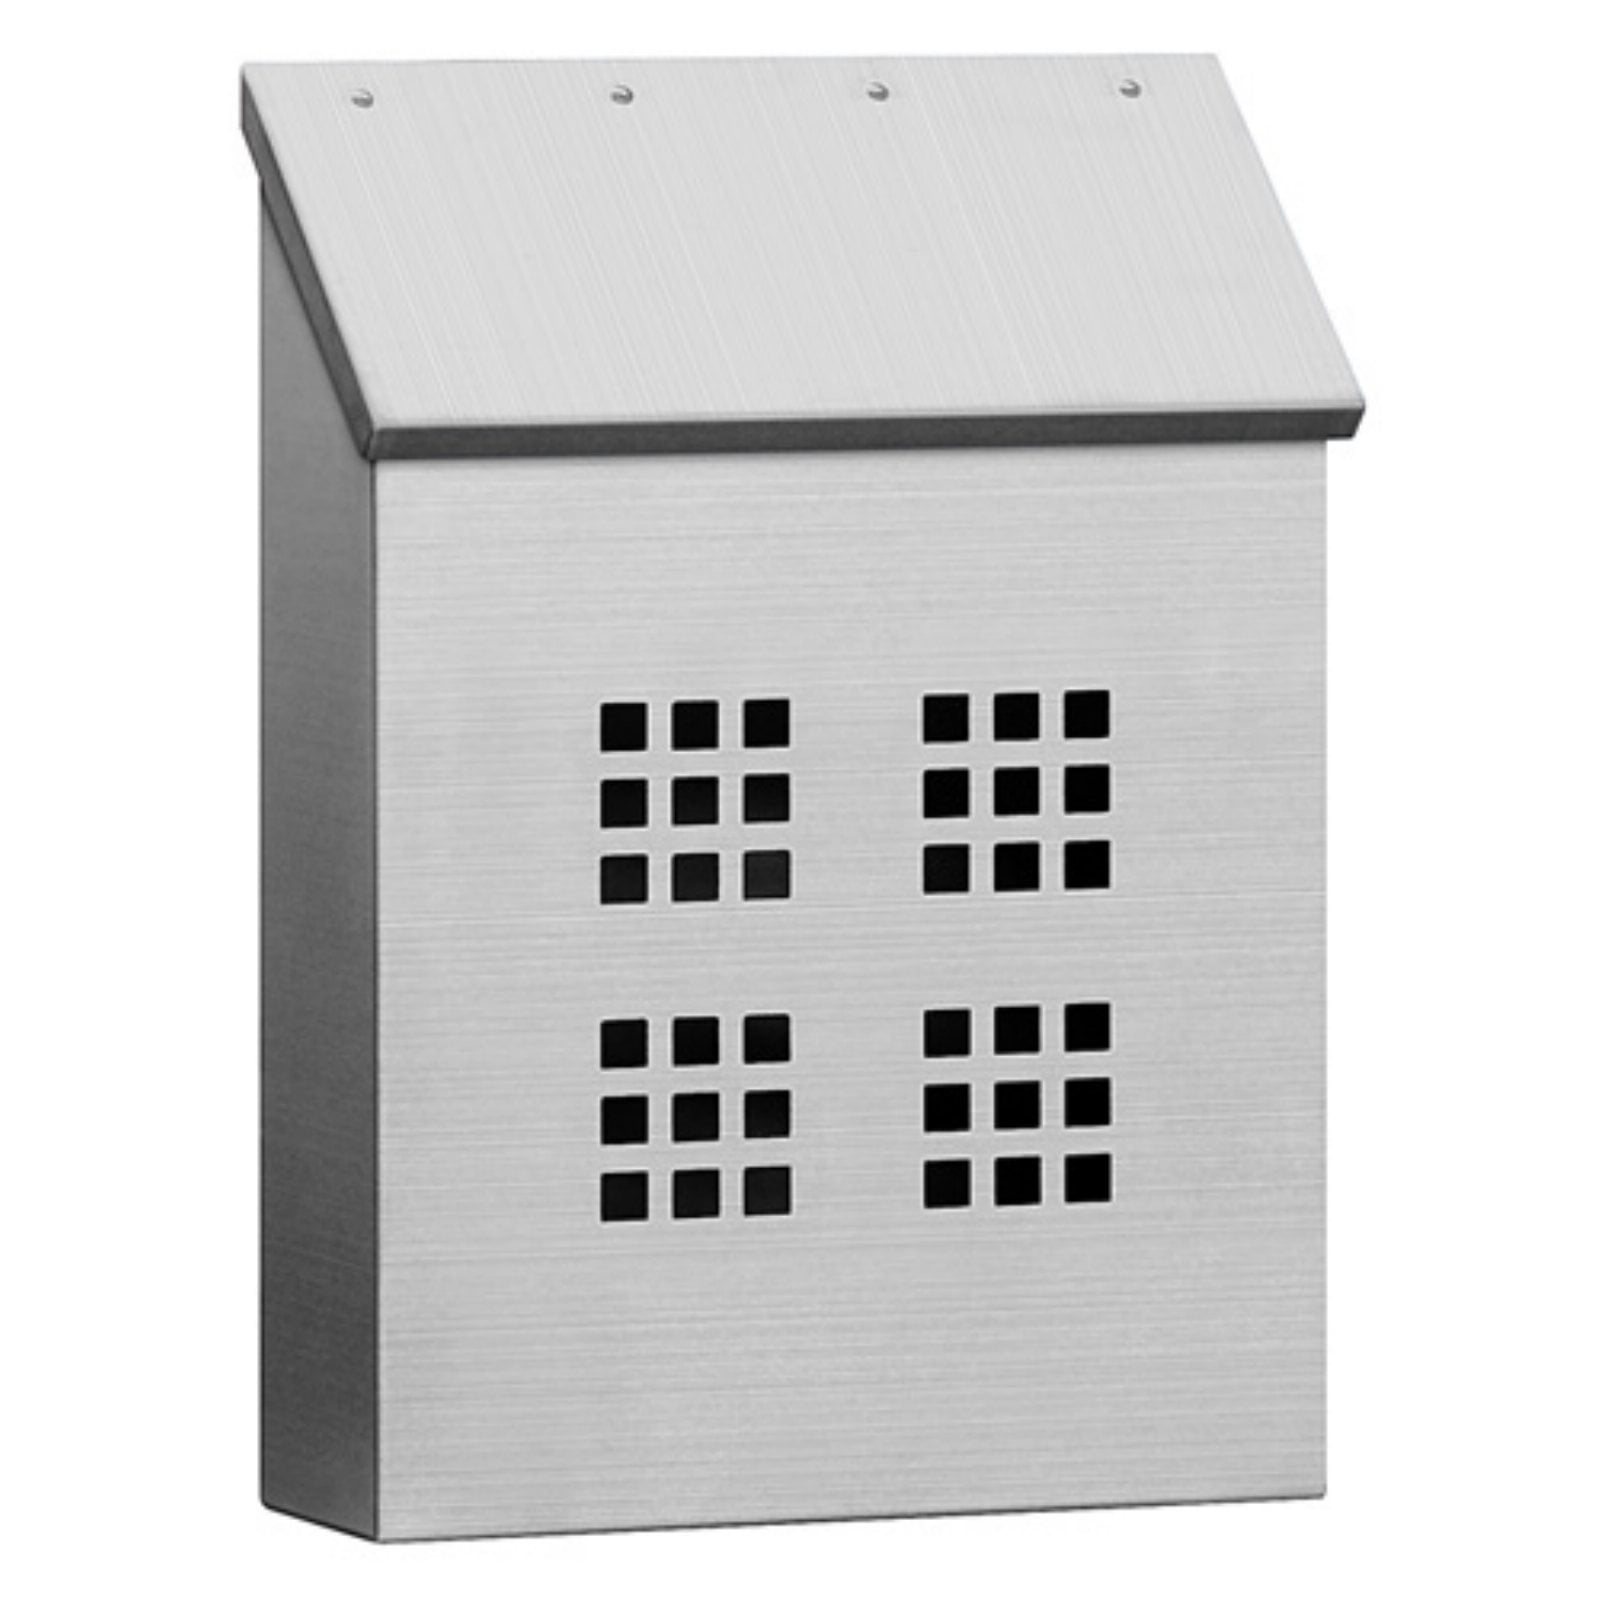 Stainless Steel Mailbox - Decorative - Vertical Style